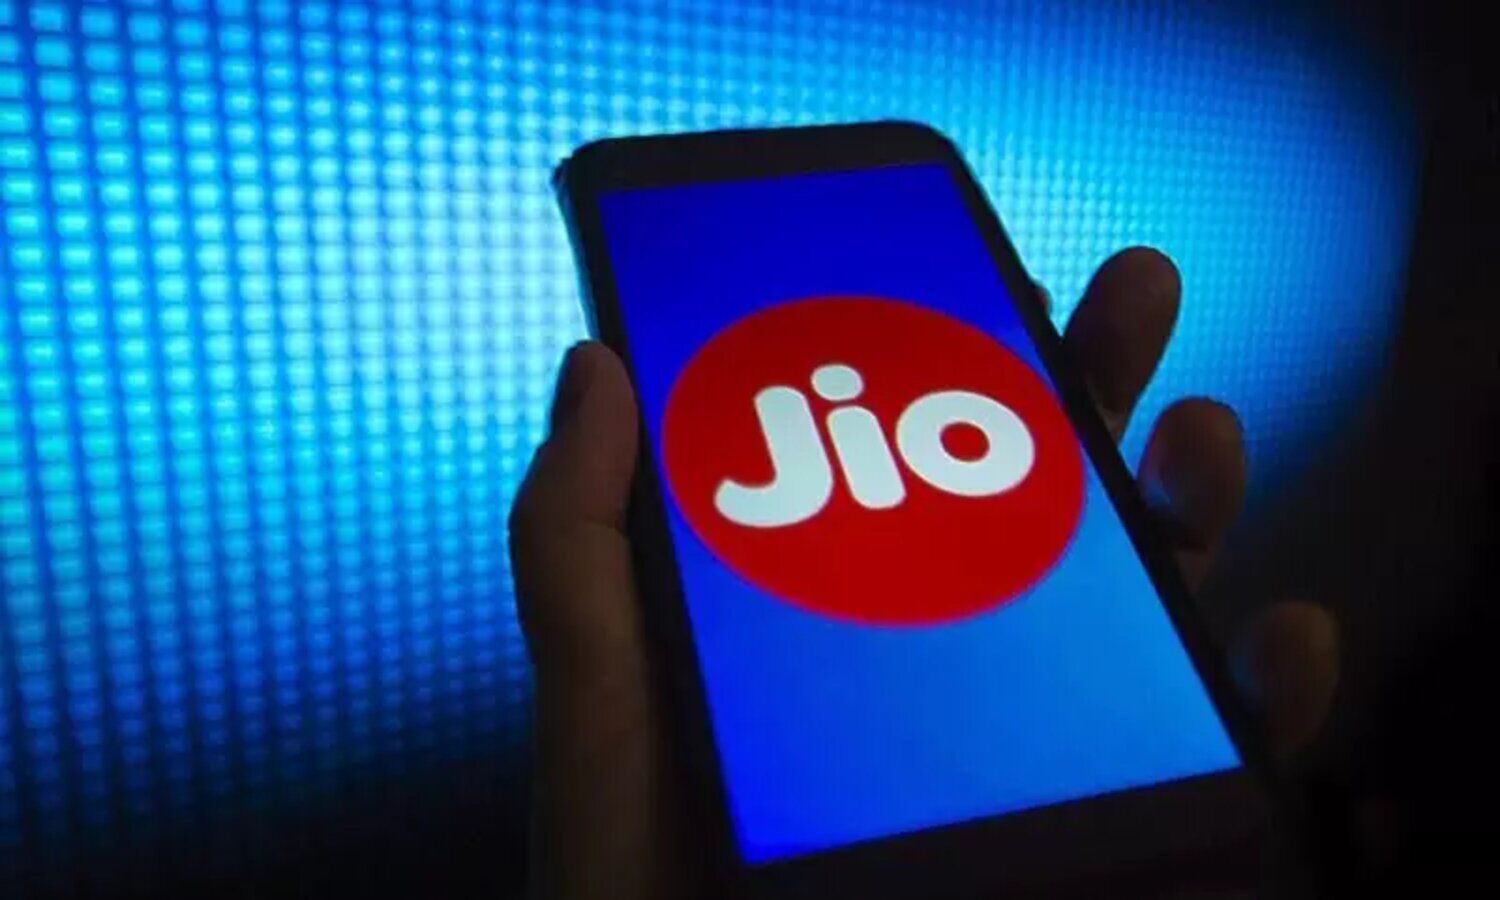 Jio Not Working: SMS and calling service of Jio stalled for hours, users were very upset